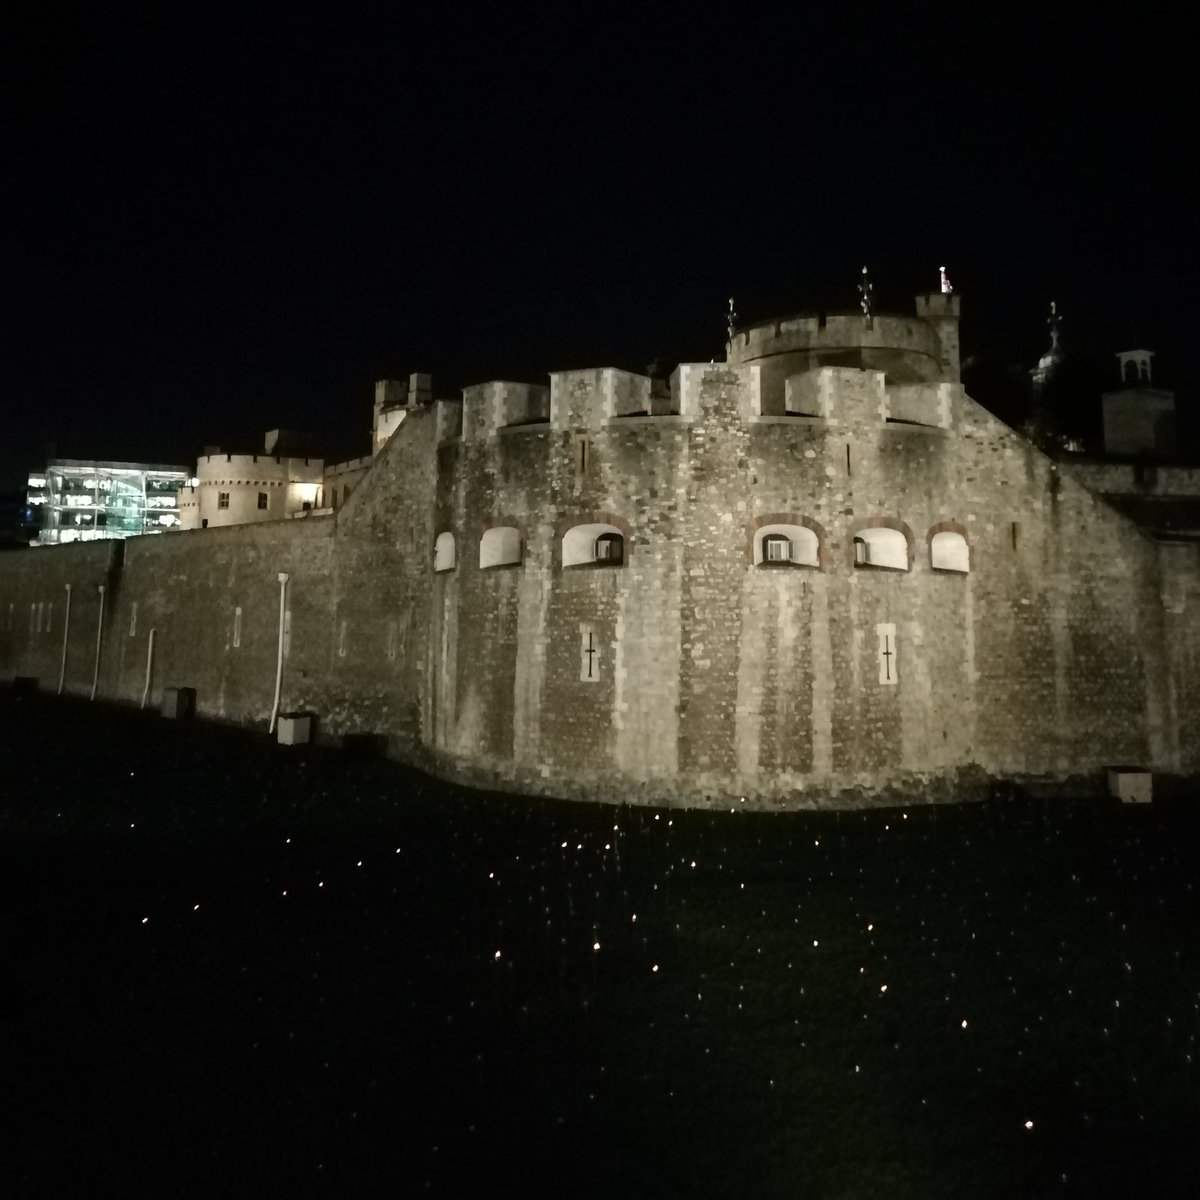 Watching the last few lights at the @thetoweroflondon #beyondthedeepeningshadow flicker & fade was almost more poignant than when they were all fully lit 
#thetowerremembers #toweroflondon #wewillrememberthem #remembrancesunday #ww1 #armistice #armistice100 #armisticeday